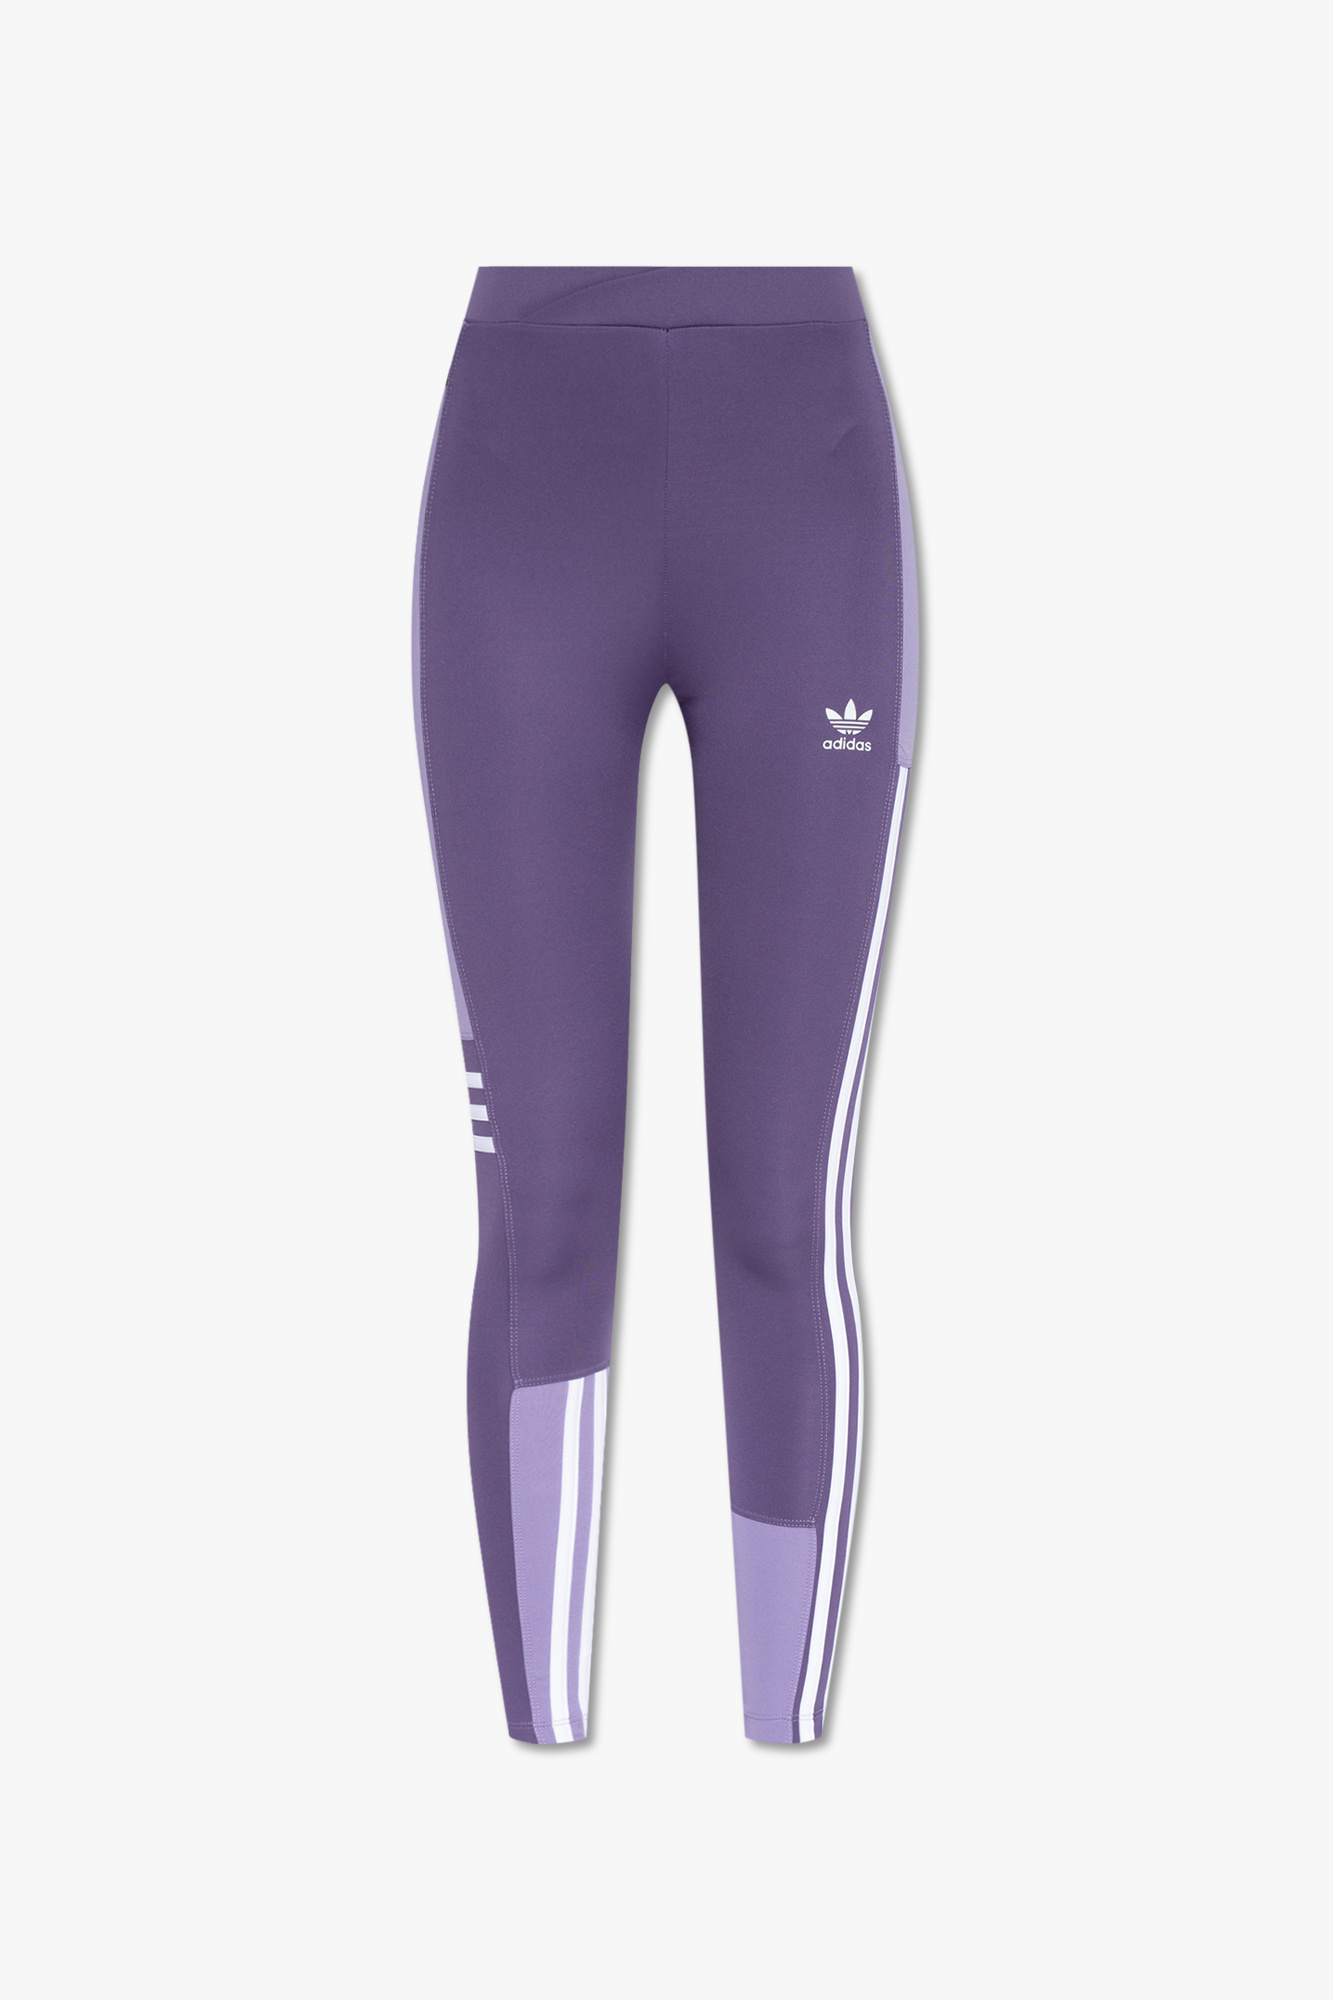  adidas Trefoil Tights Women's, Purple, Size XS : Clothing,  Shoes & Jewelry